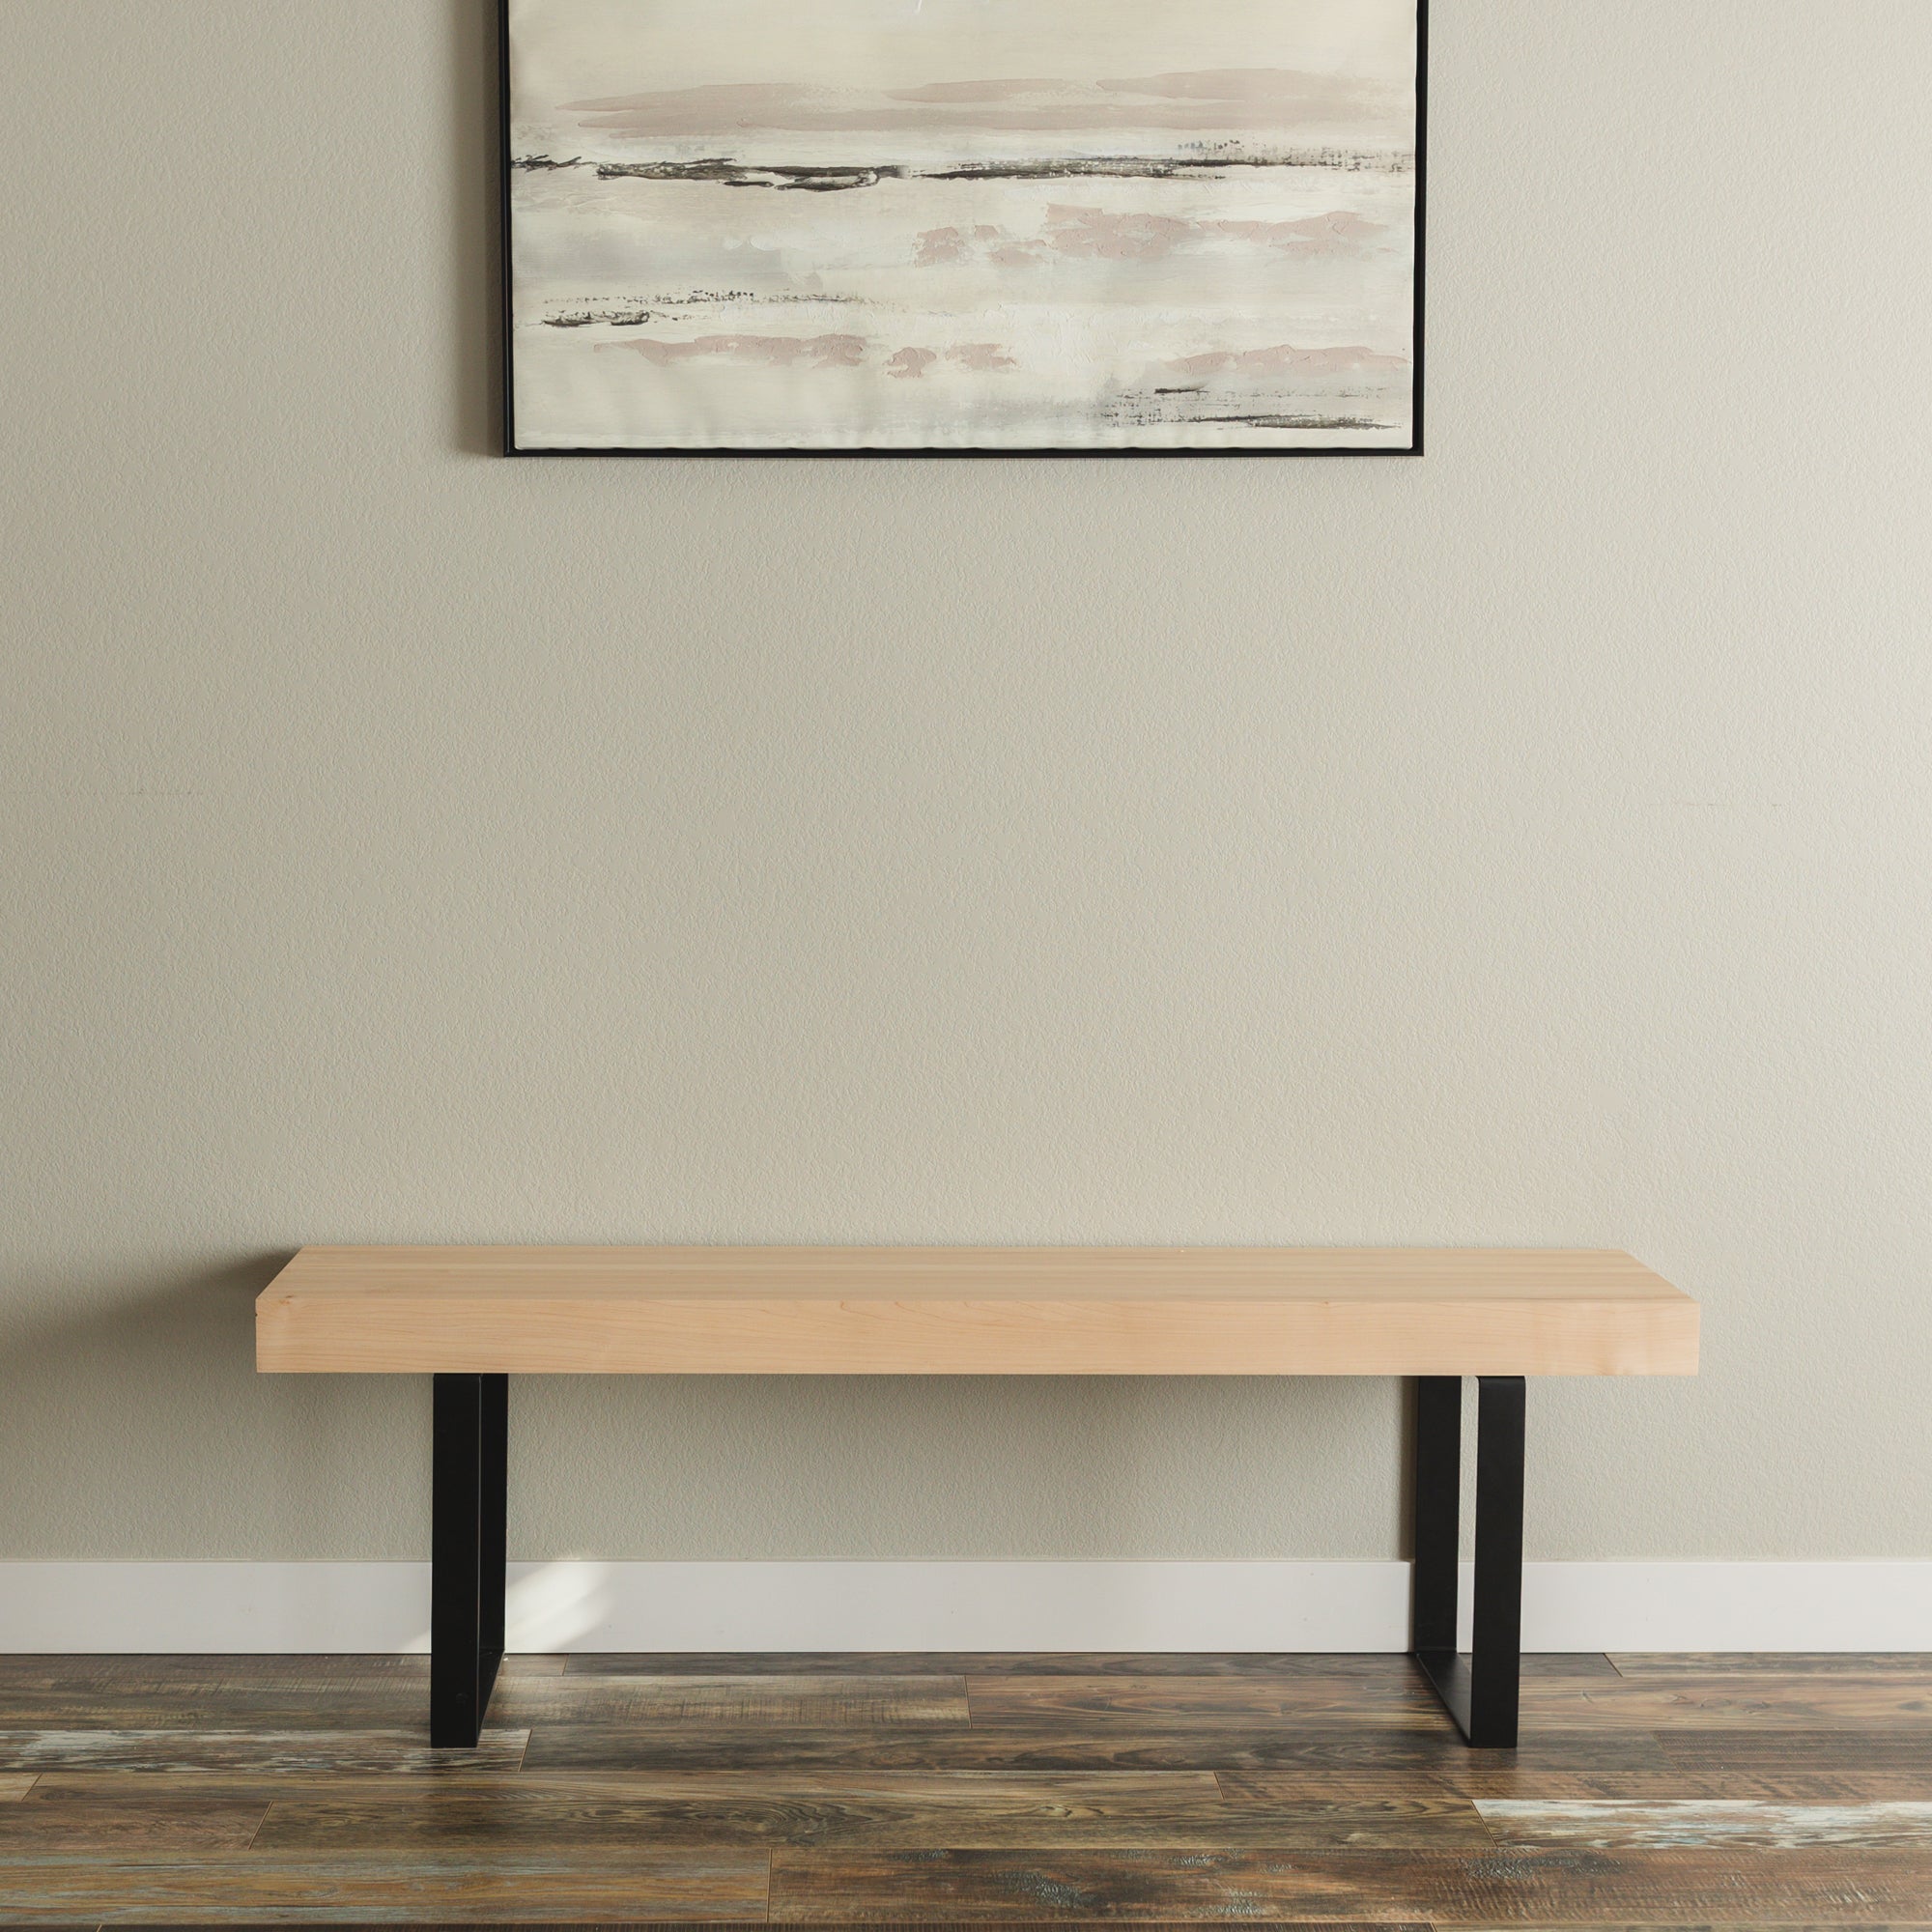 The Maple Butcher Block Bench - FargoWoodworks